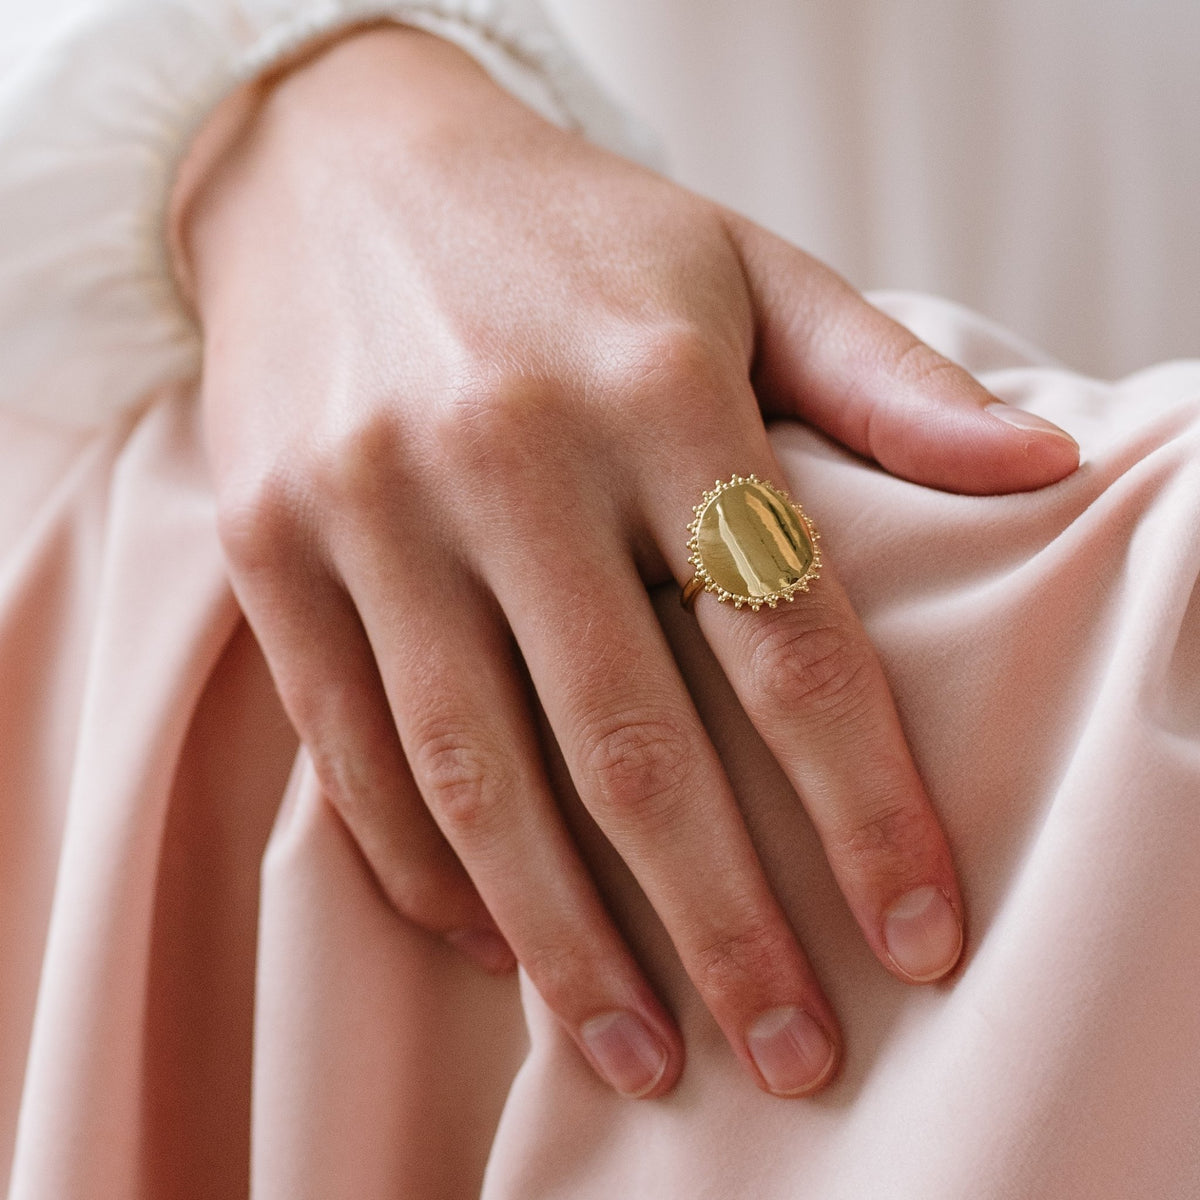 BELIEVE SOLEIL RING - GOLD - SO PRETTY CARA COTTER